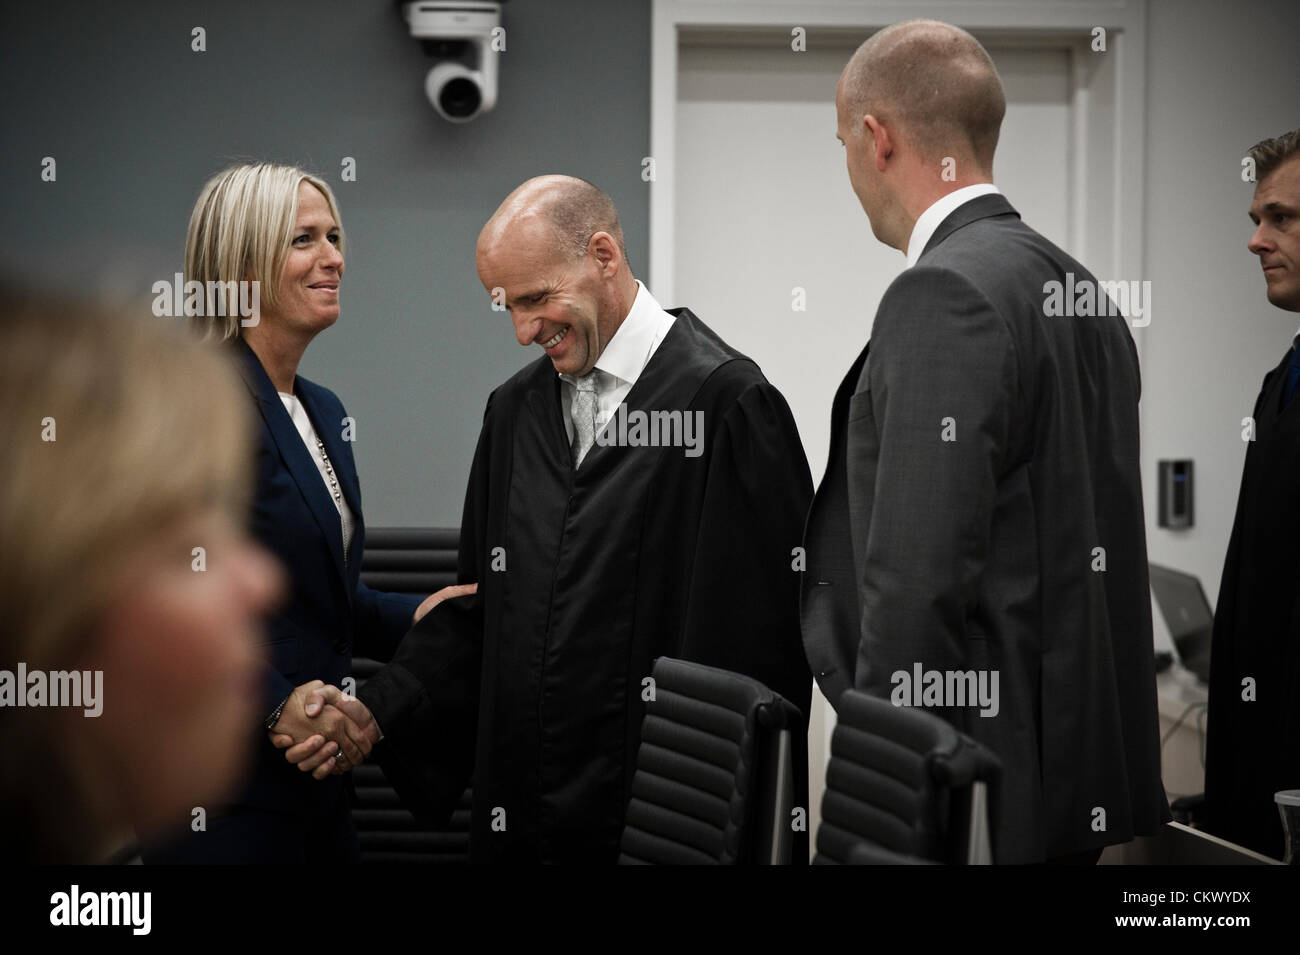 August 24, 2012 - Oslo, Norway: Key people in the Anders Behring Breivik trial appears in court on the day of the verdict. Lawyer Geir Lippestad who represent Breivik shake hands with prosecutor Inga Bejer Engh Stock Photo